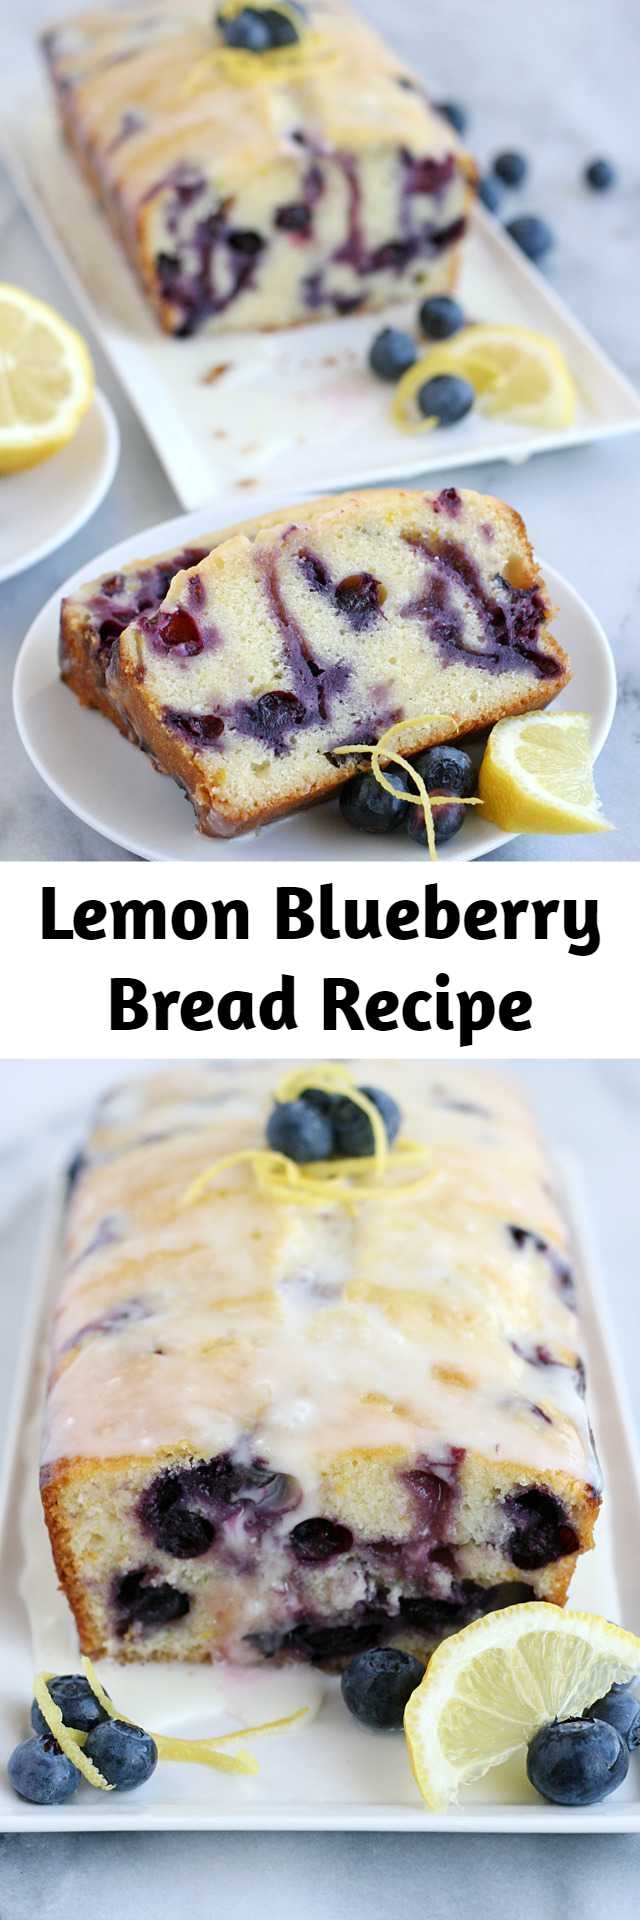 Lemon Blueberry Bread Recipe - This Lemon Blueberry Bread is a delicious, flavorful quick bread perfect to enjoy along with a cup of coffee or tea. It's moist, fluffy, sweet and flavorful! I love the bright flavors of blueberry and lemon, and they work together so beautifully in this simple loaf. I know I’ll be making this recipe again and again!